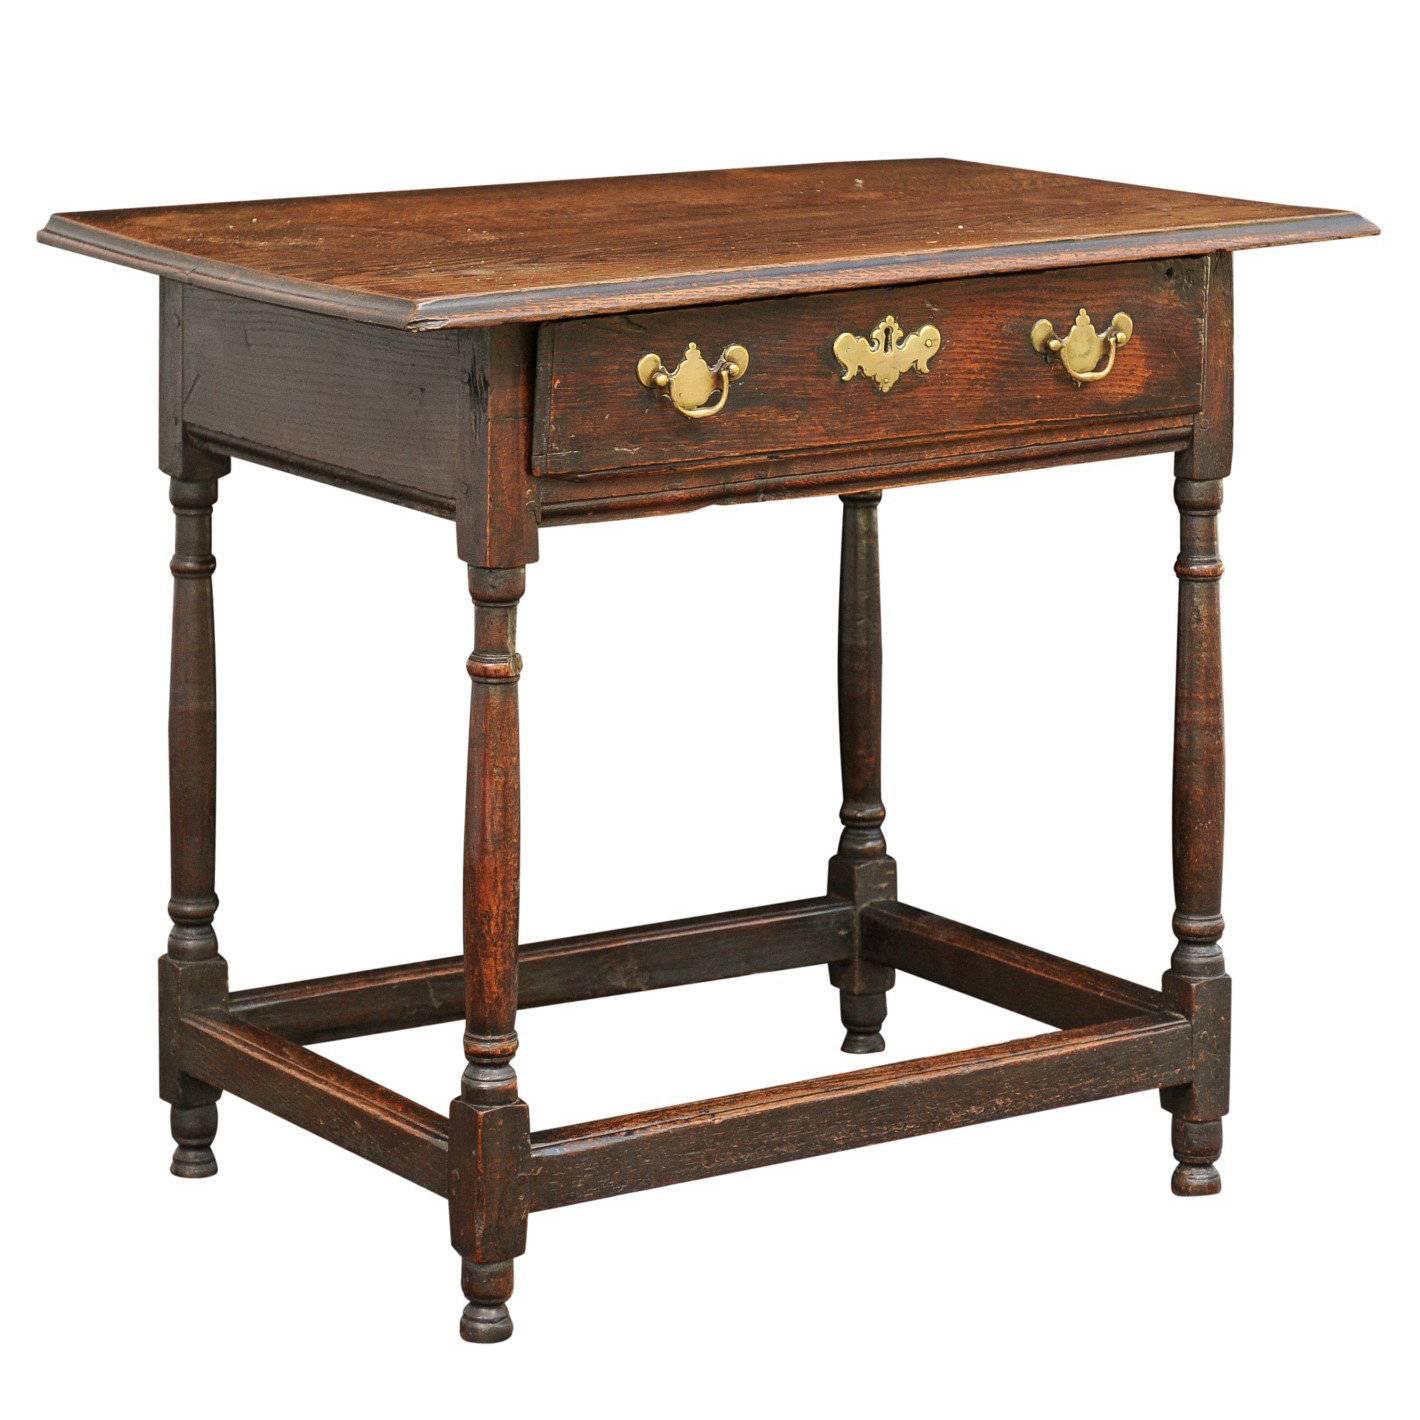 English Late 18th Century Oak Side Table with Single Drawer on Thin Column Legs For Sale